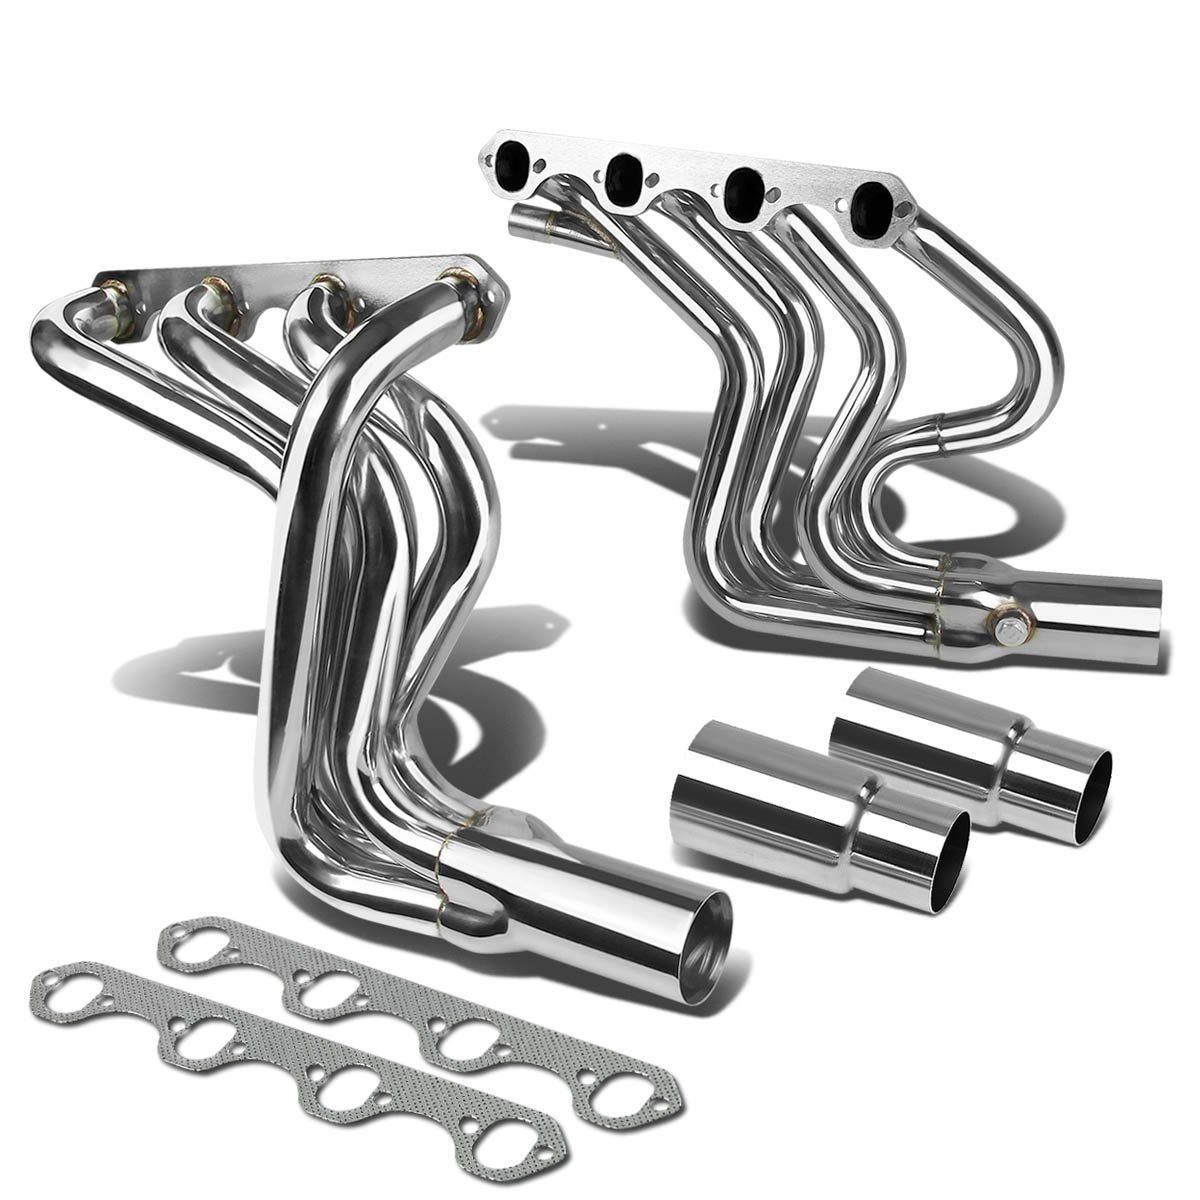 RACING SS MANIFOLD/HEADER FOR 87-96 FORD F-150/F-250/BRONCO PICKUP 5.8L V8 Featured Image